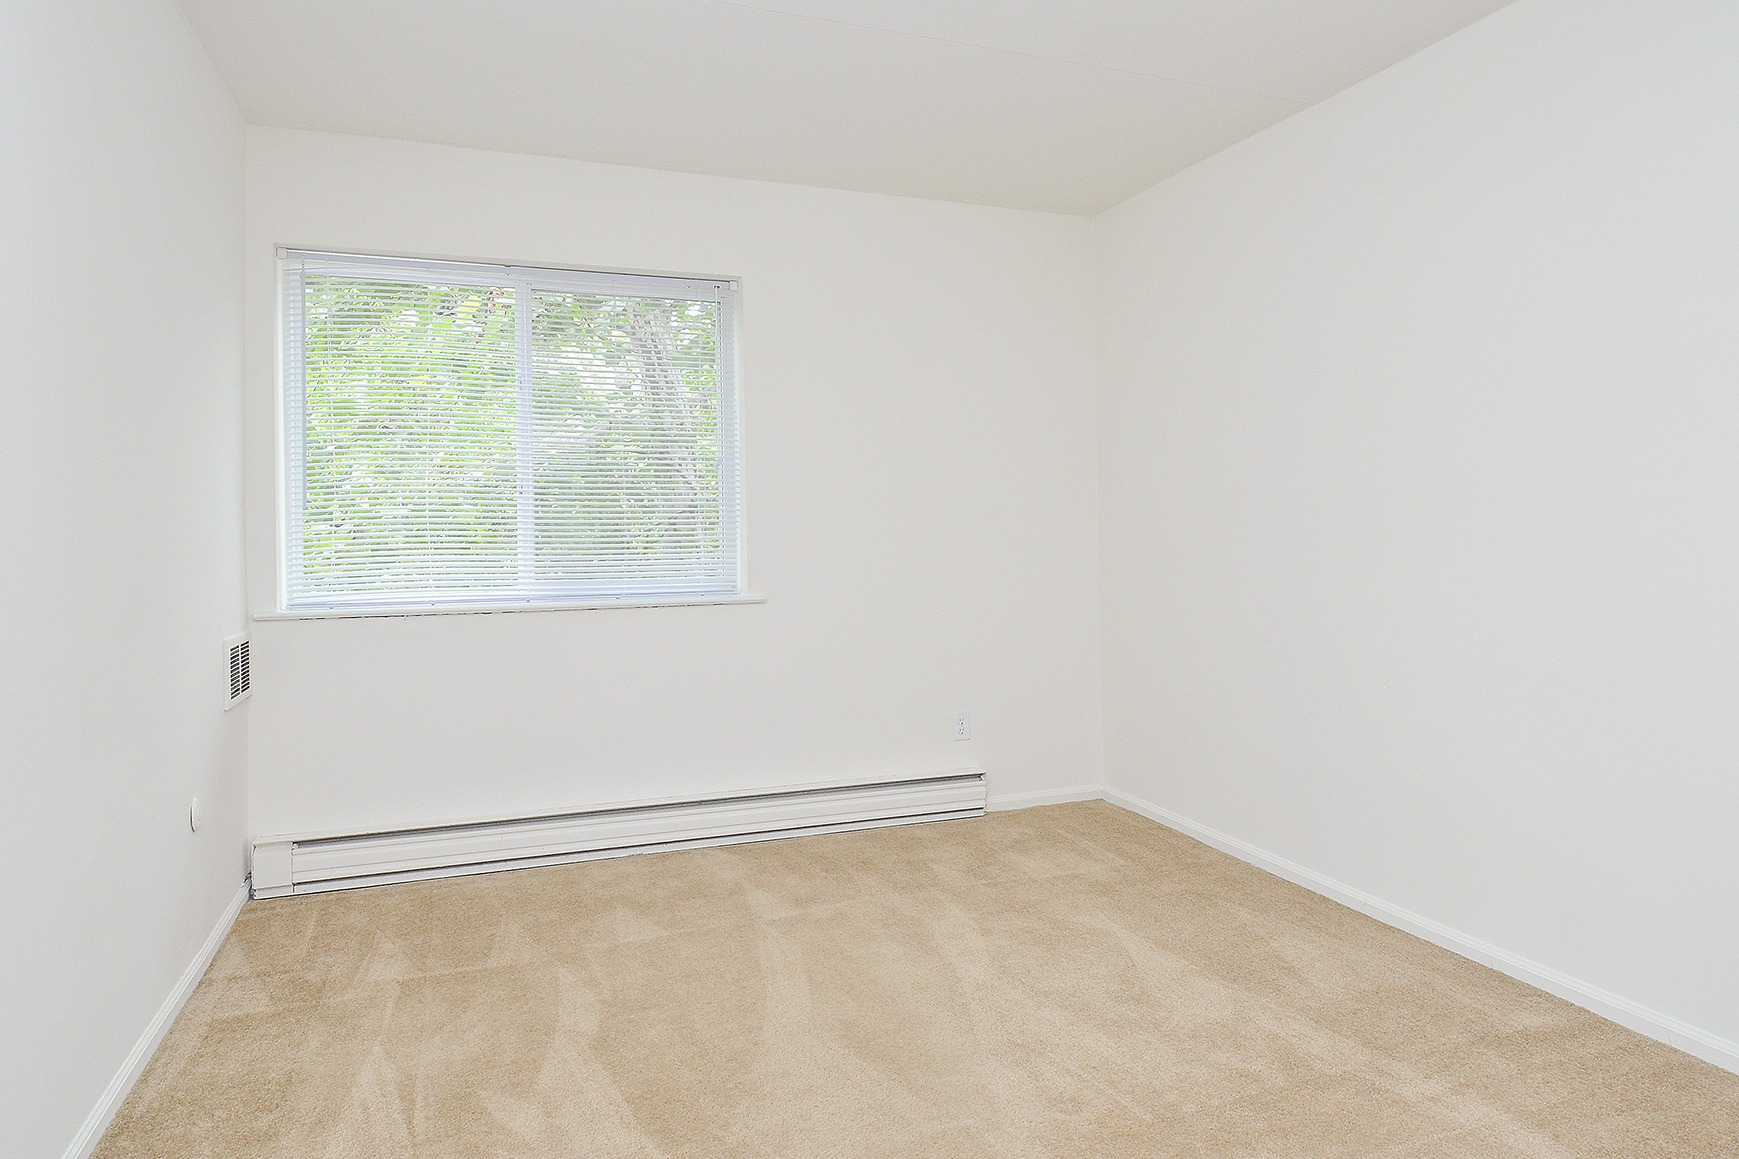 Spacious bedroom with a large window, white walls, and beige carpeting.